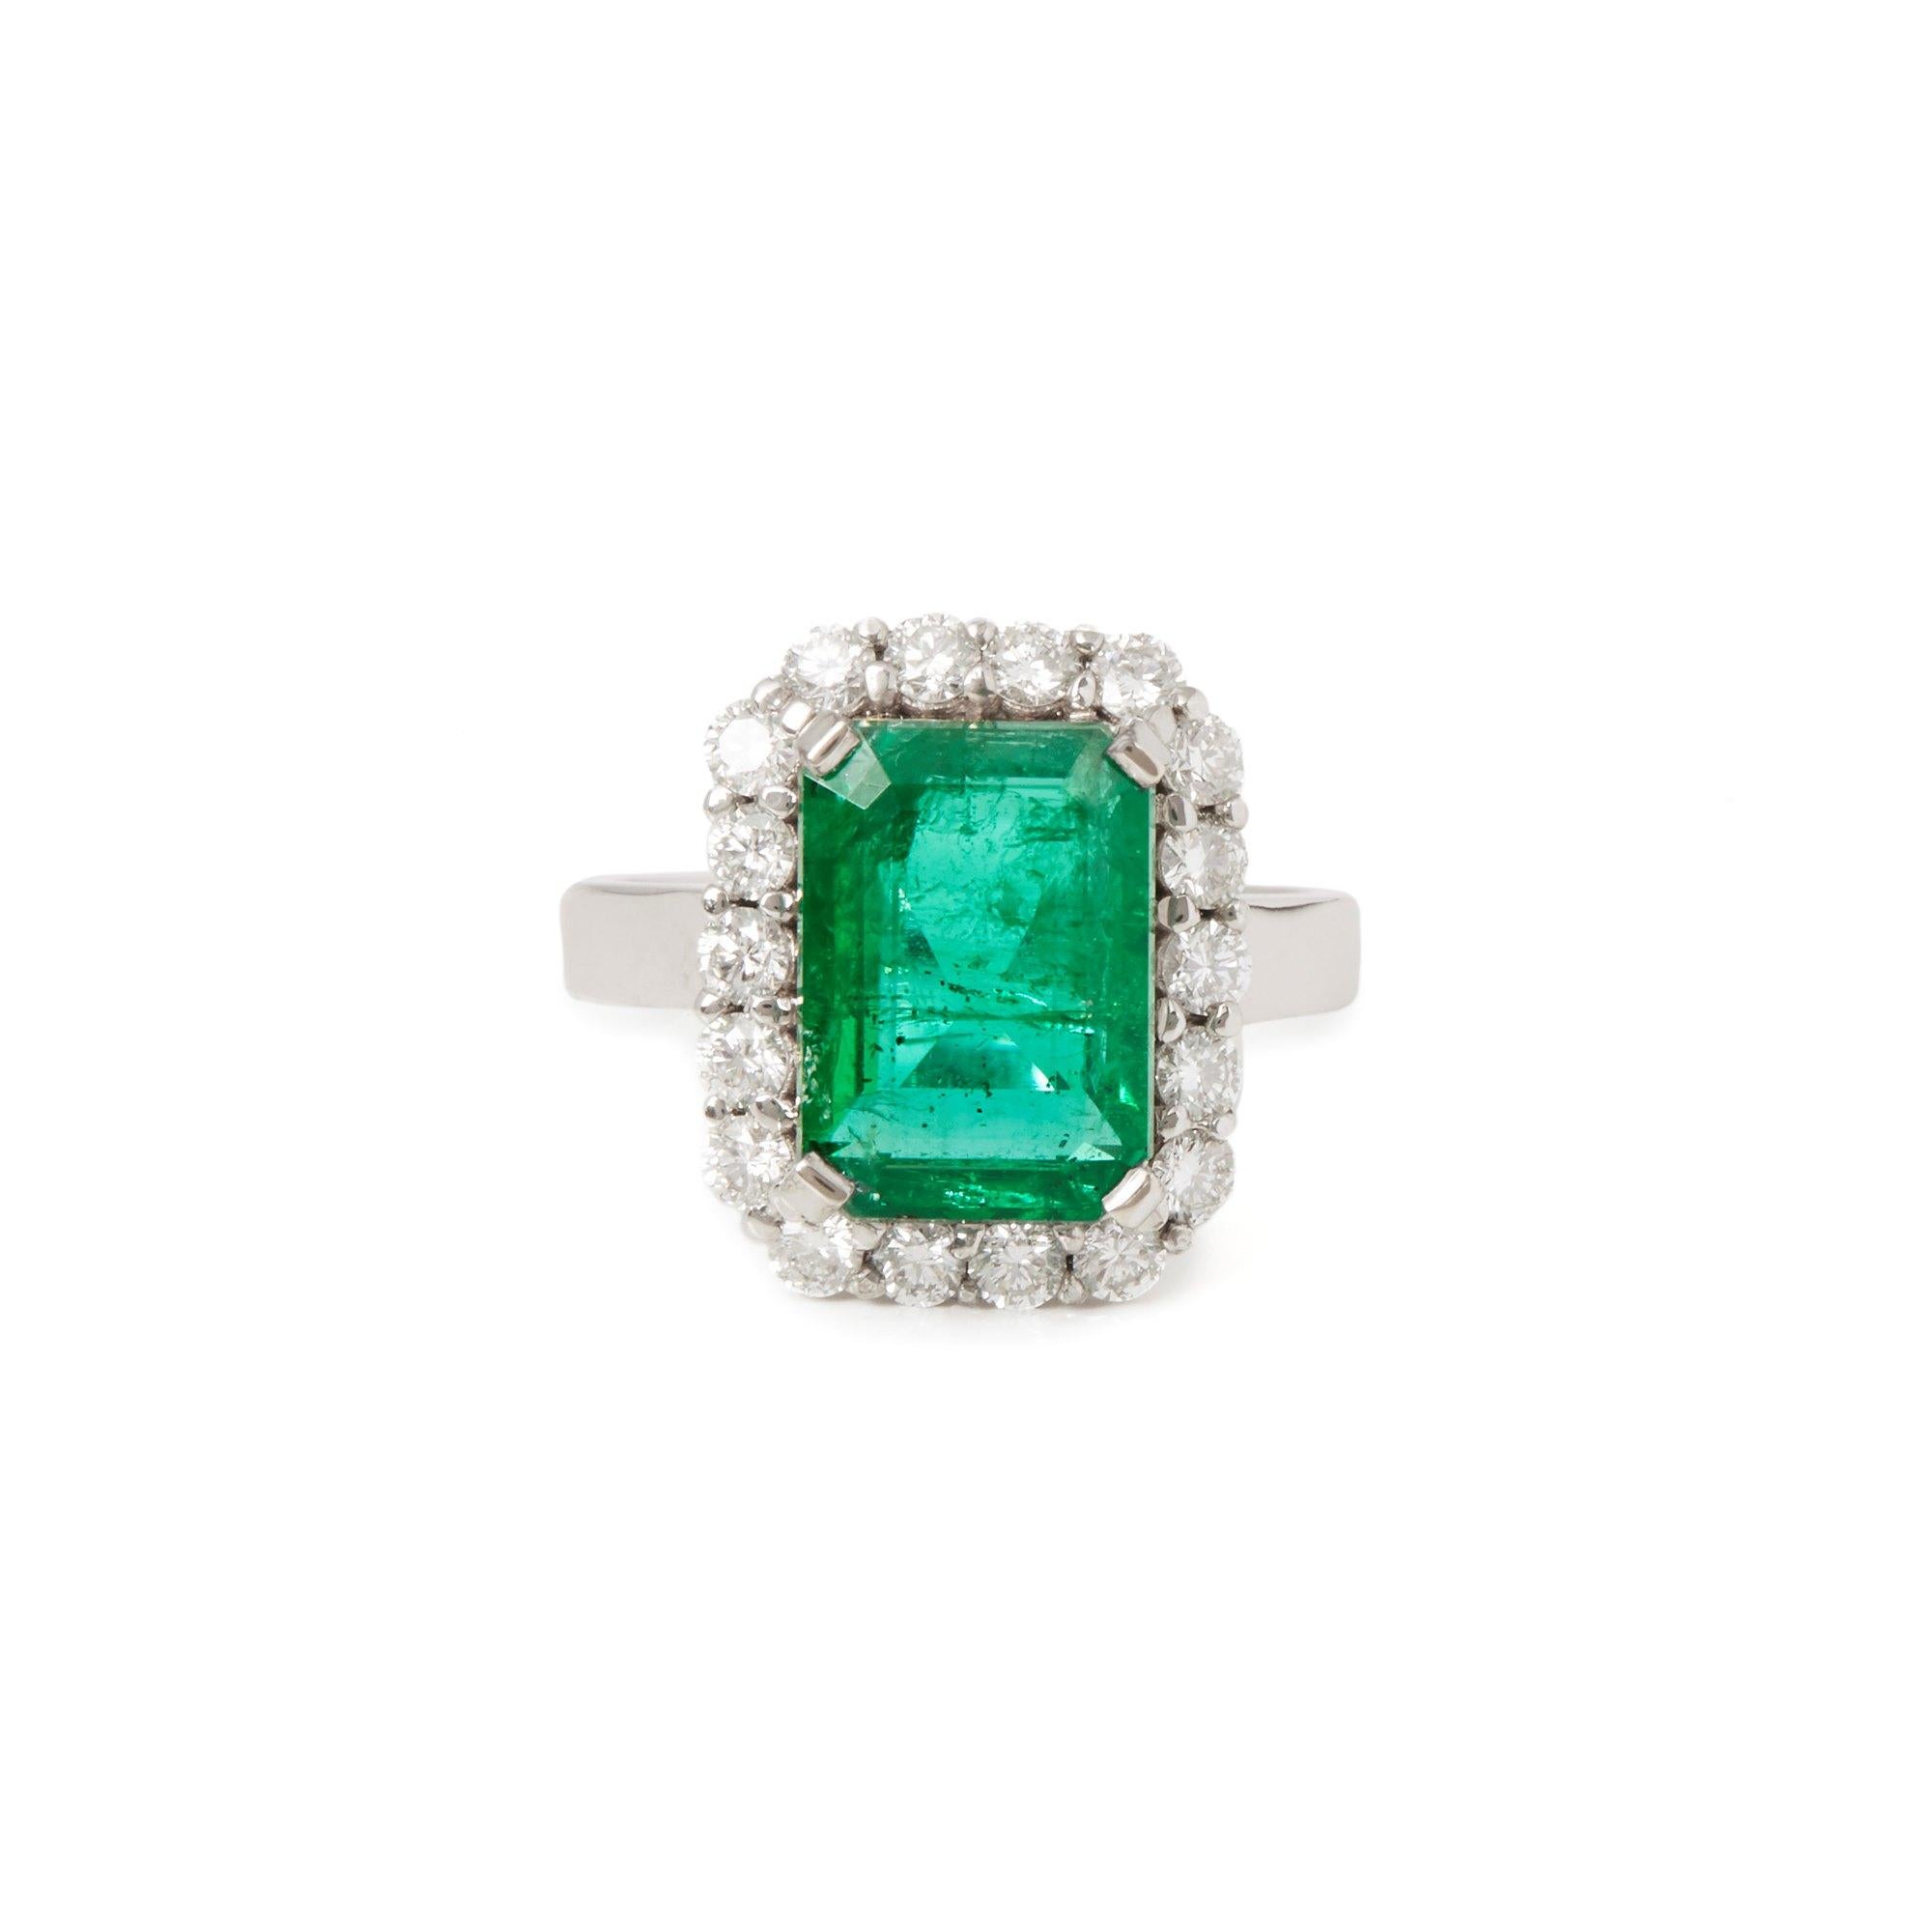 This ring designed by David Jerome is from his private collection and features one Emerald cut Emerald totalling 4.58cts. Set with round brilliant cut Diamonds totalling 0.80cts mounted in an 18k white gold setting. Finger size UK L, EU size 52, USA